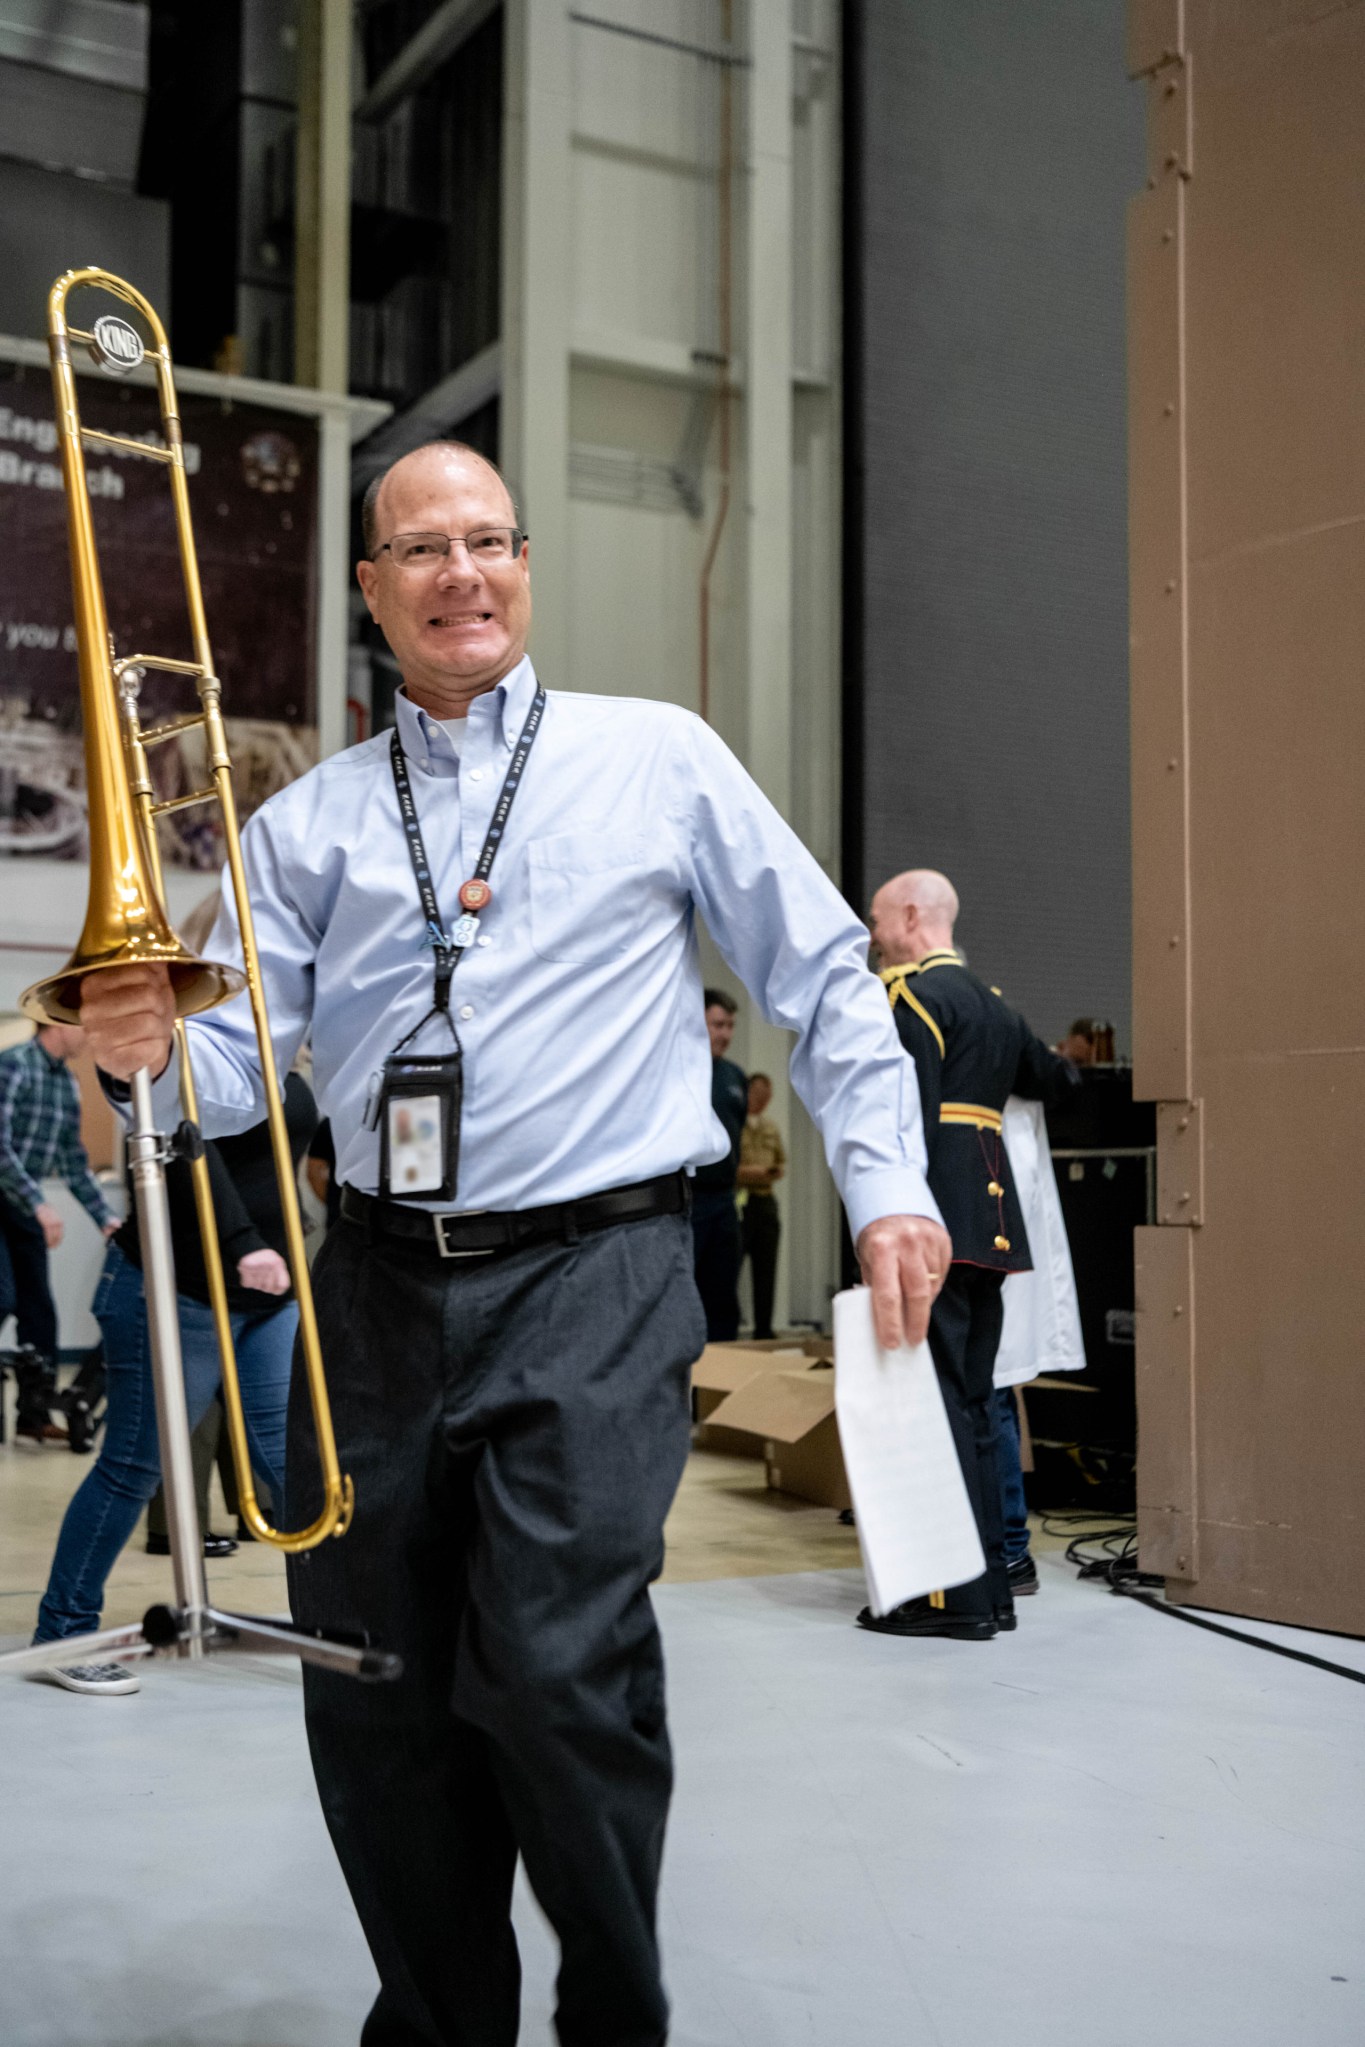 Gary Davis, a man in a blue shirt, dark pants, glasses, and a lanyard, smiles broadly while holding a trombone in Goddard's acoustic testing chamber. Other musicians are visible behind him.